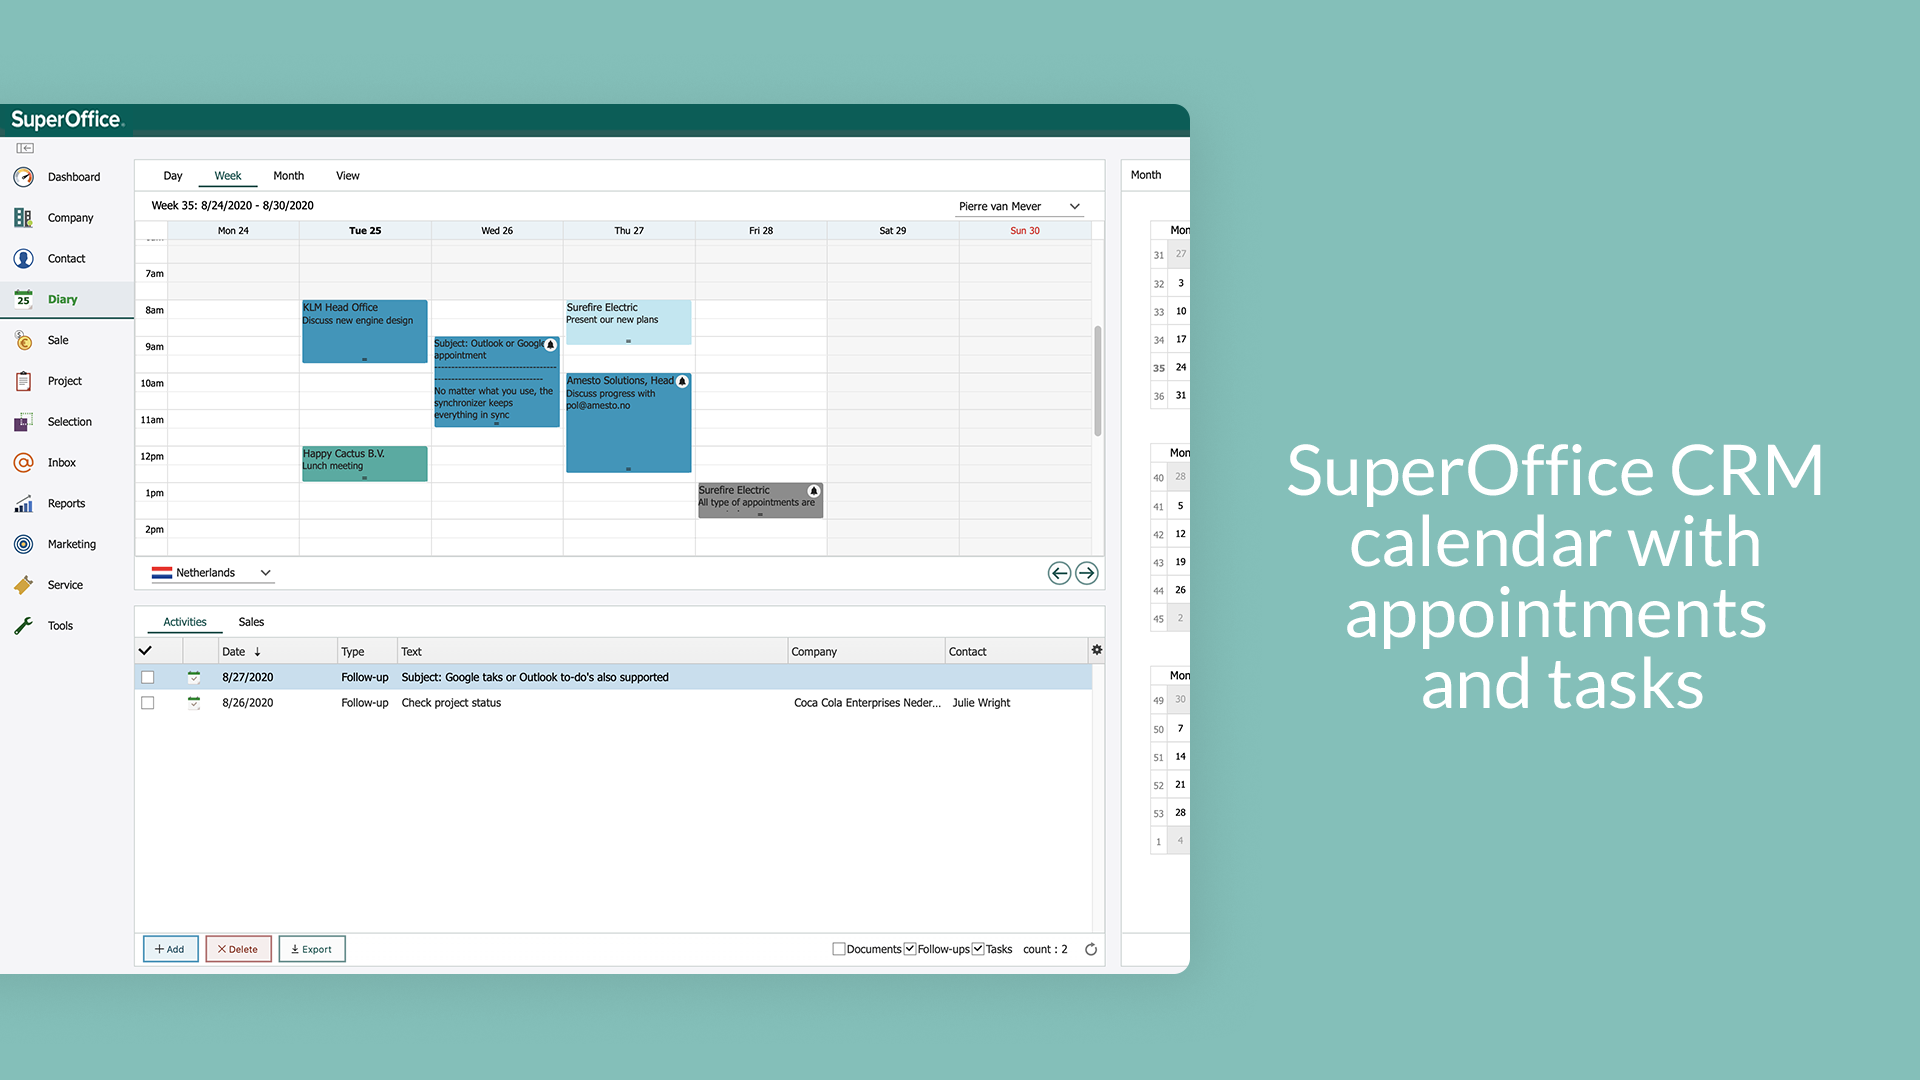 SuperOffice CRM calendar with appointments and tasks